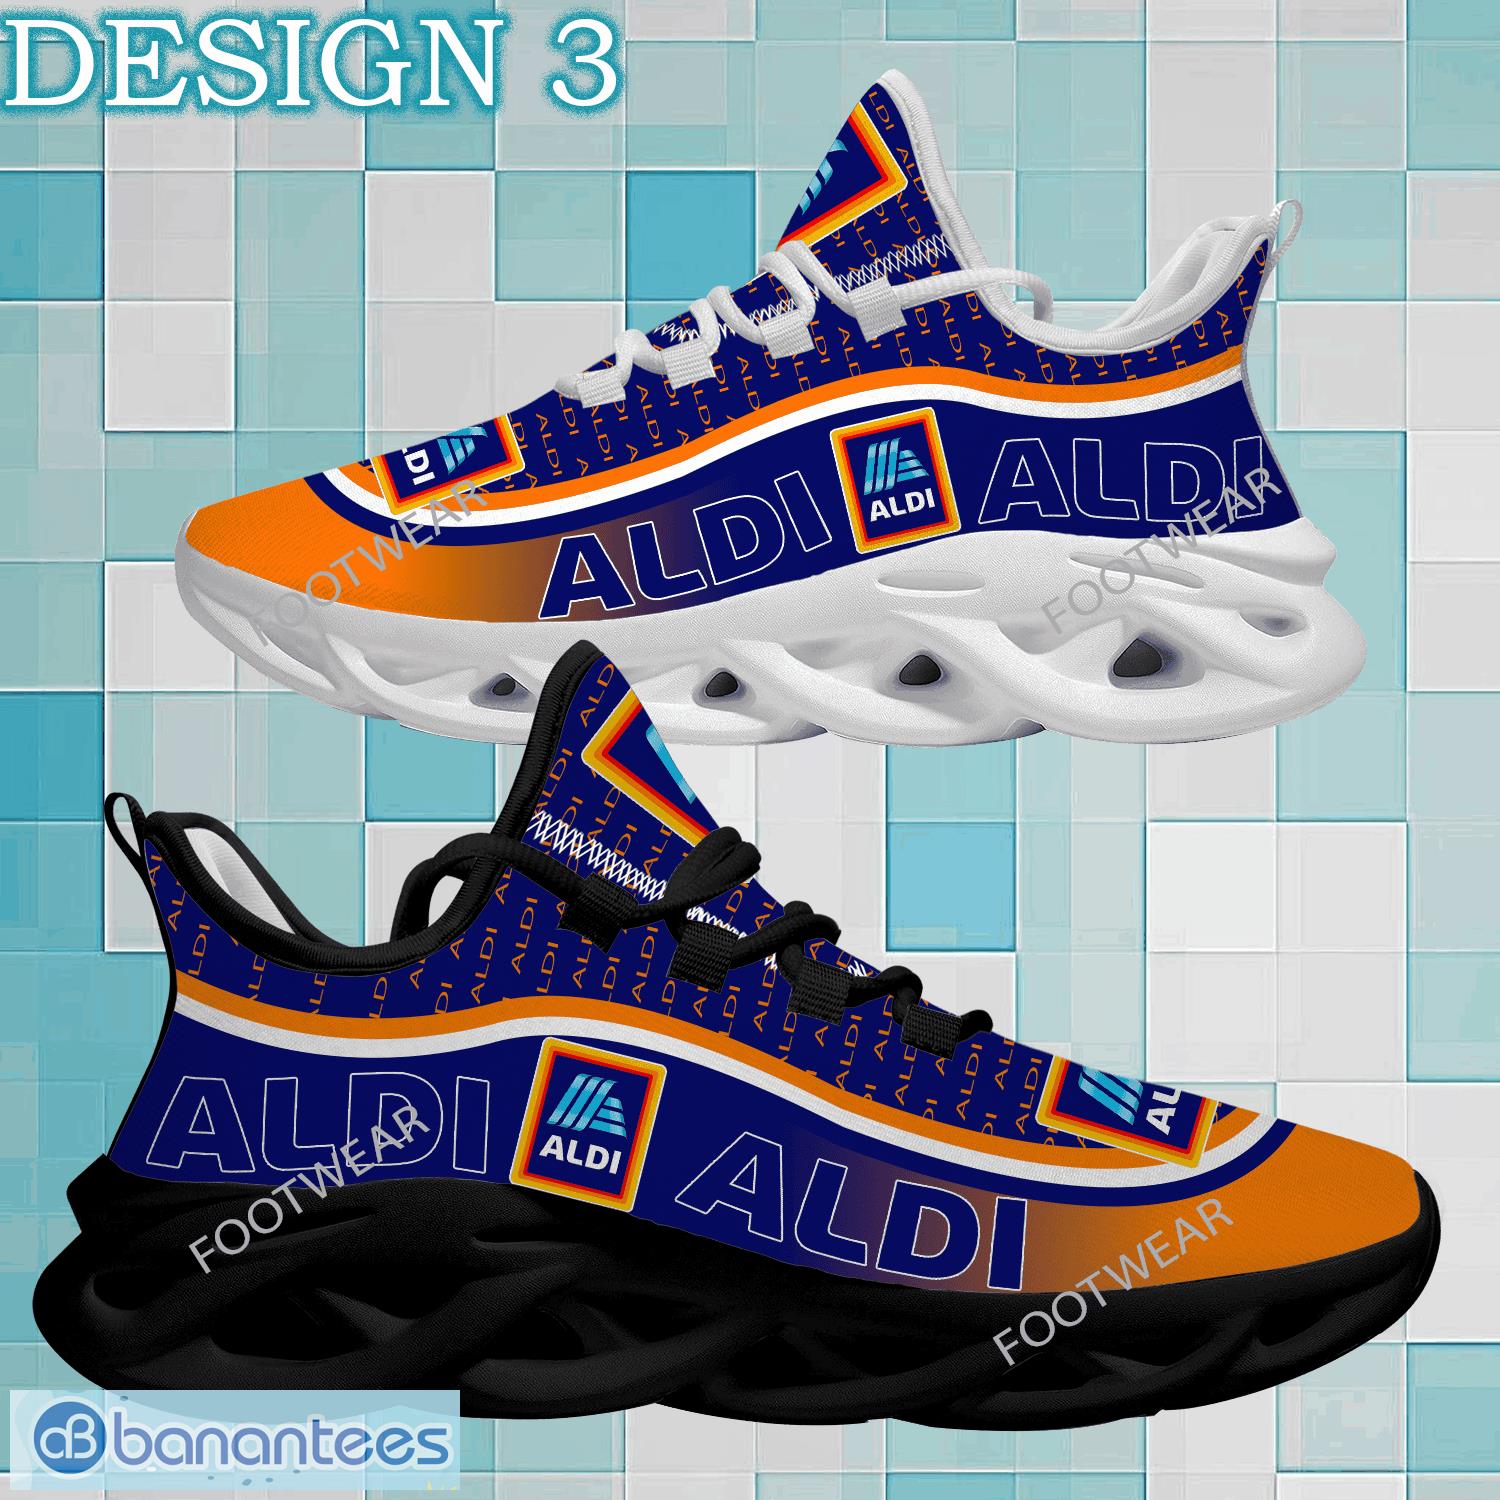 Aldi Brand Logo New Text Max Soul Shoes Style Unconventional Chunky Sneaker - aldi Brand Logo New Text Max Soul Shoes Style 1